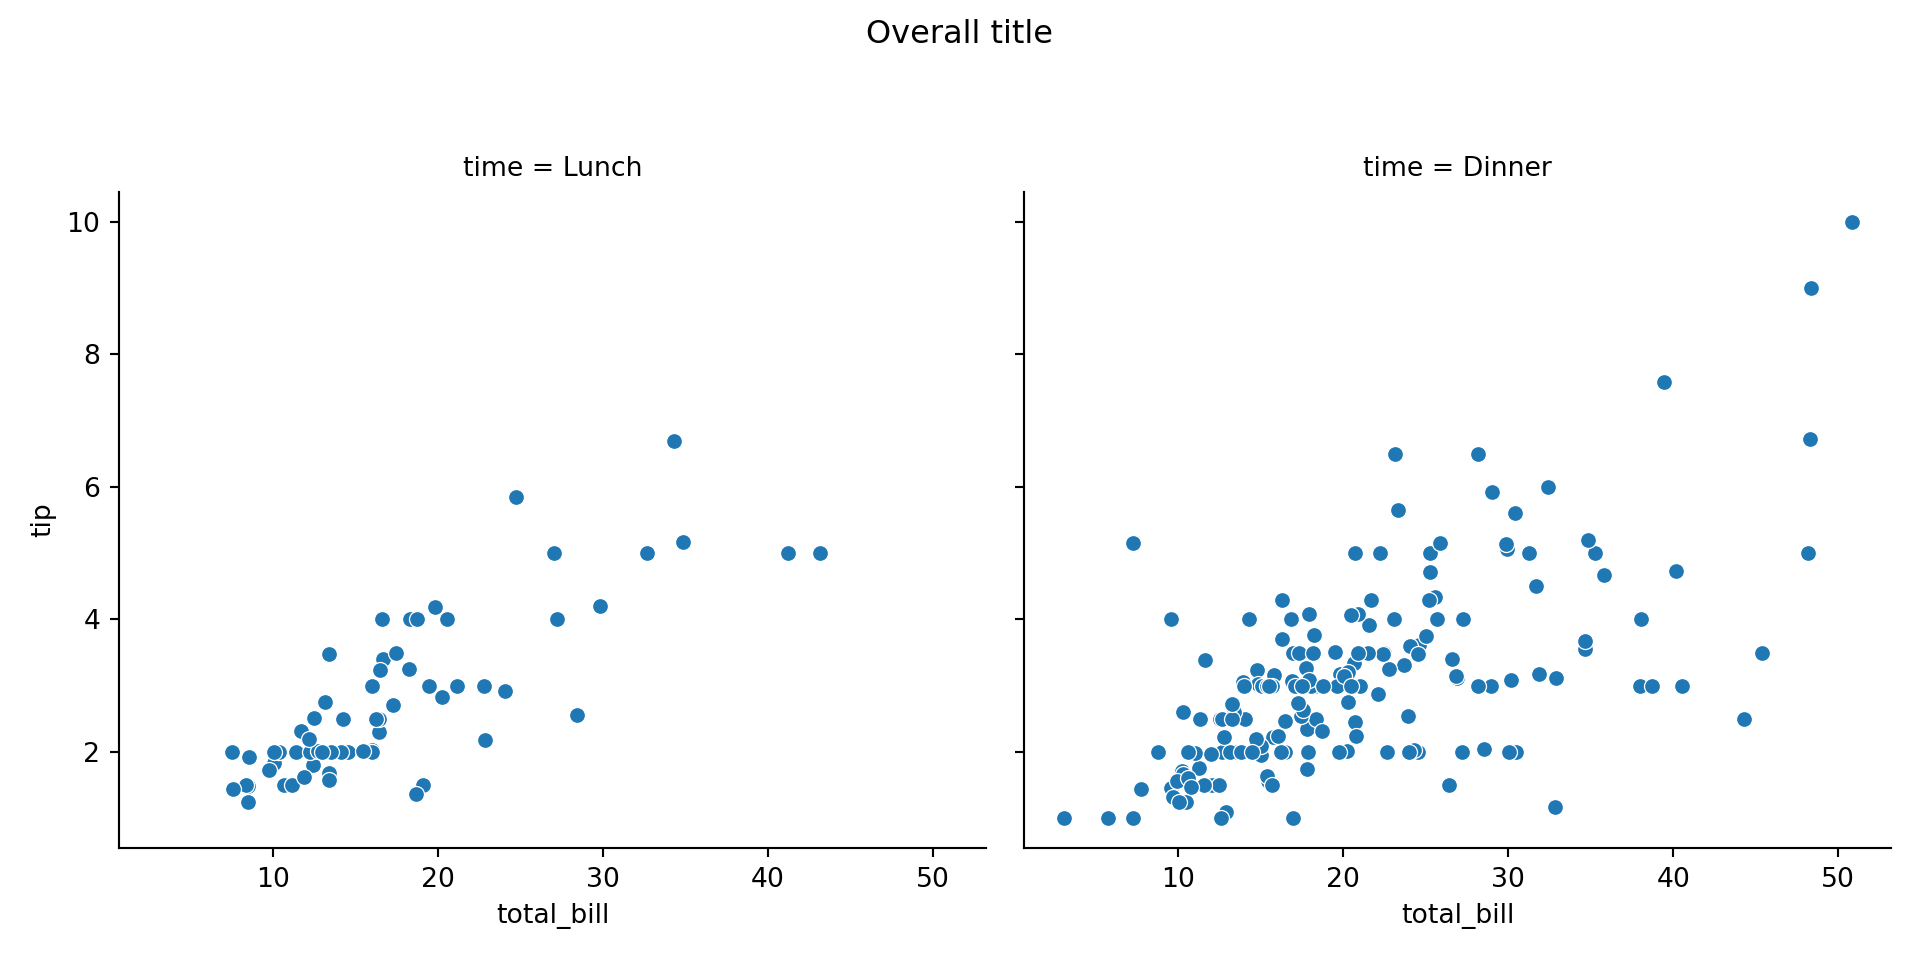 Adjusting the overall title in seaborn